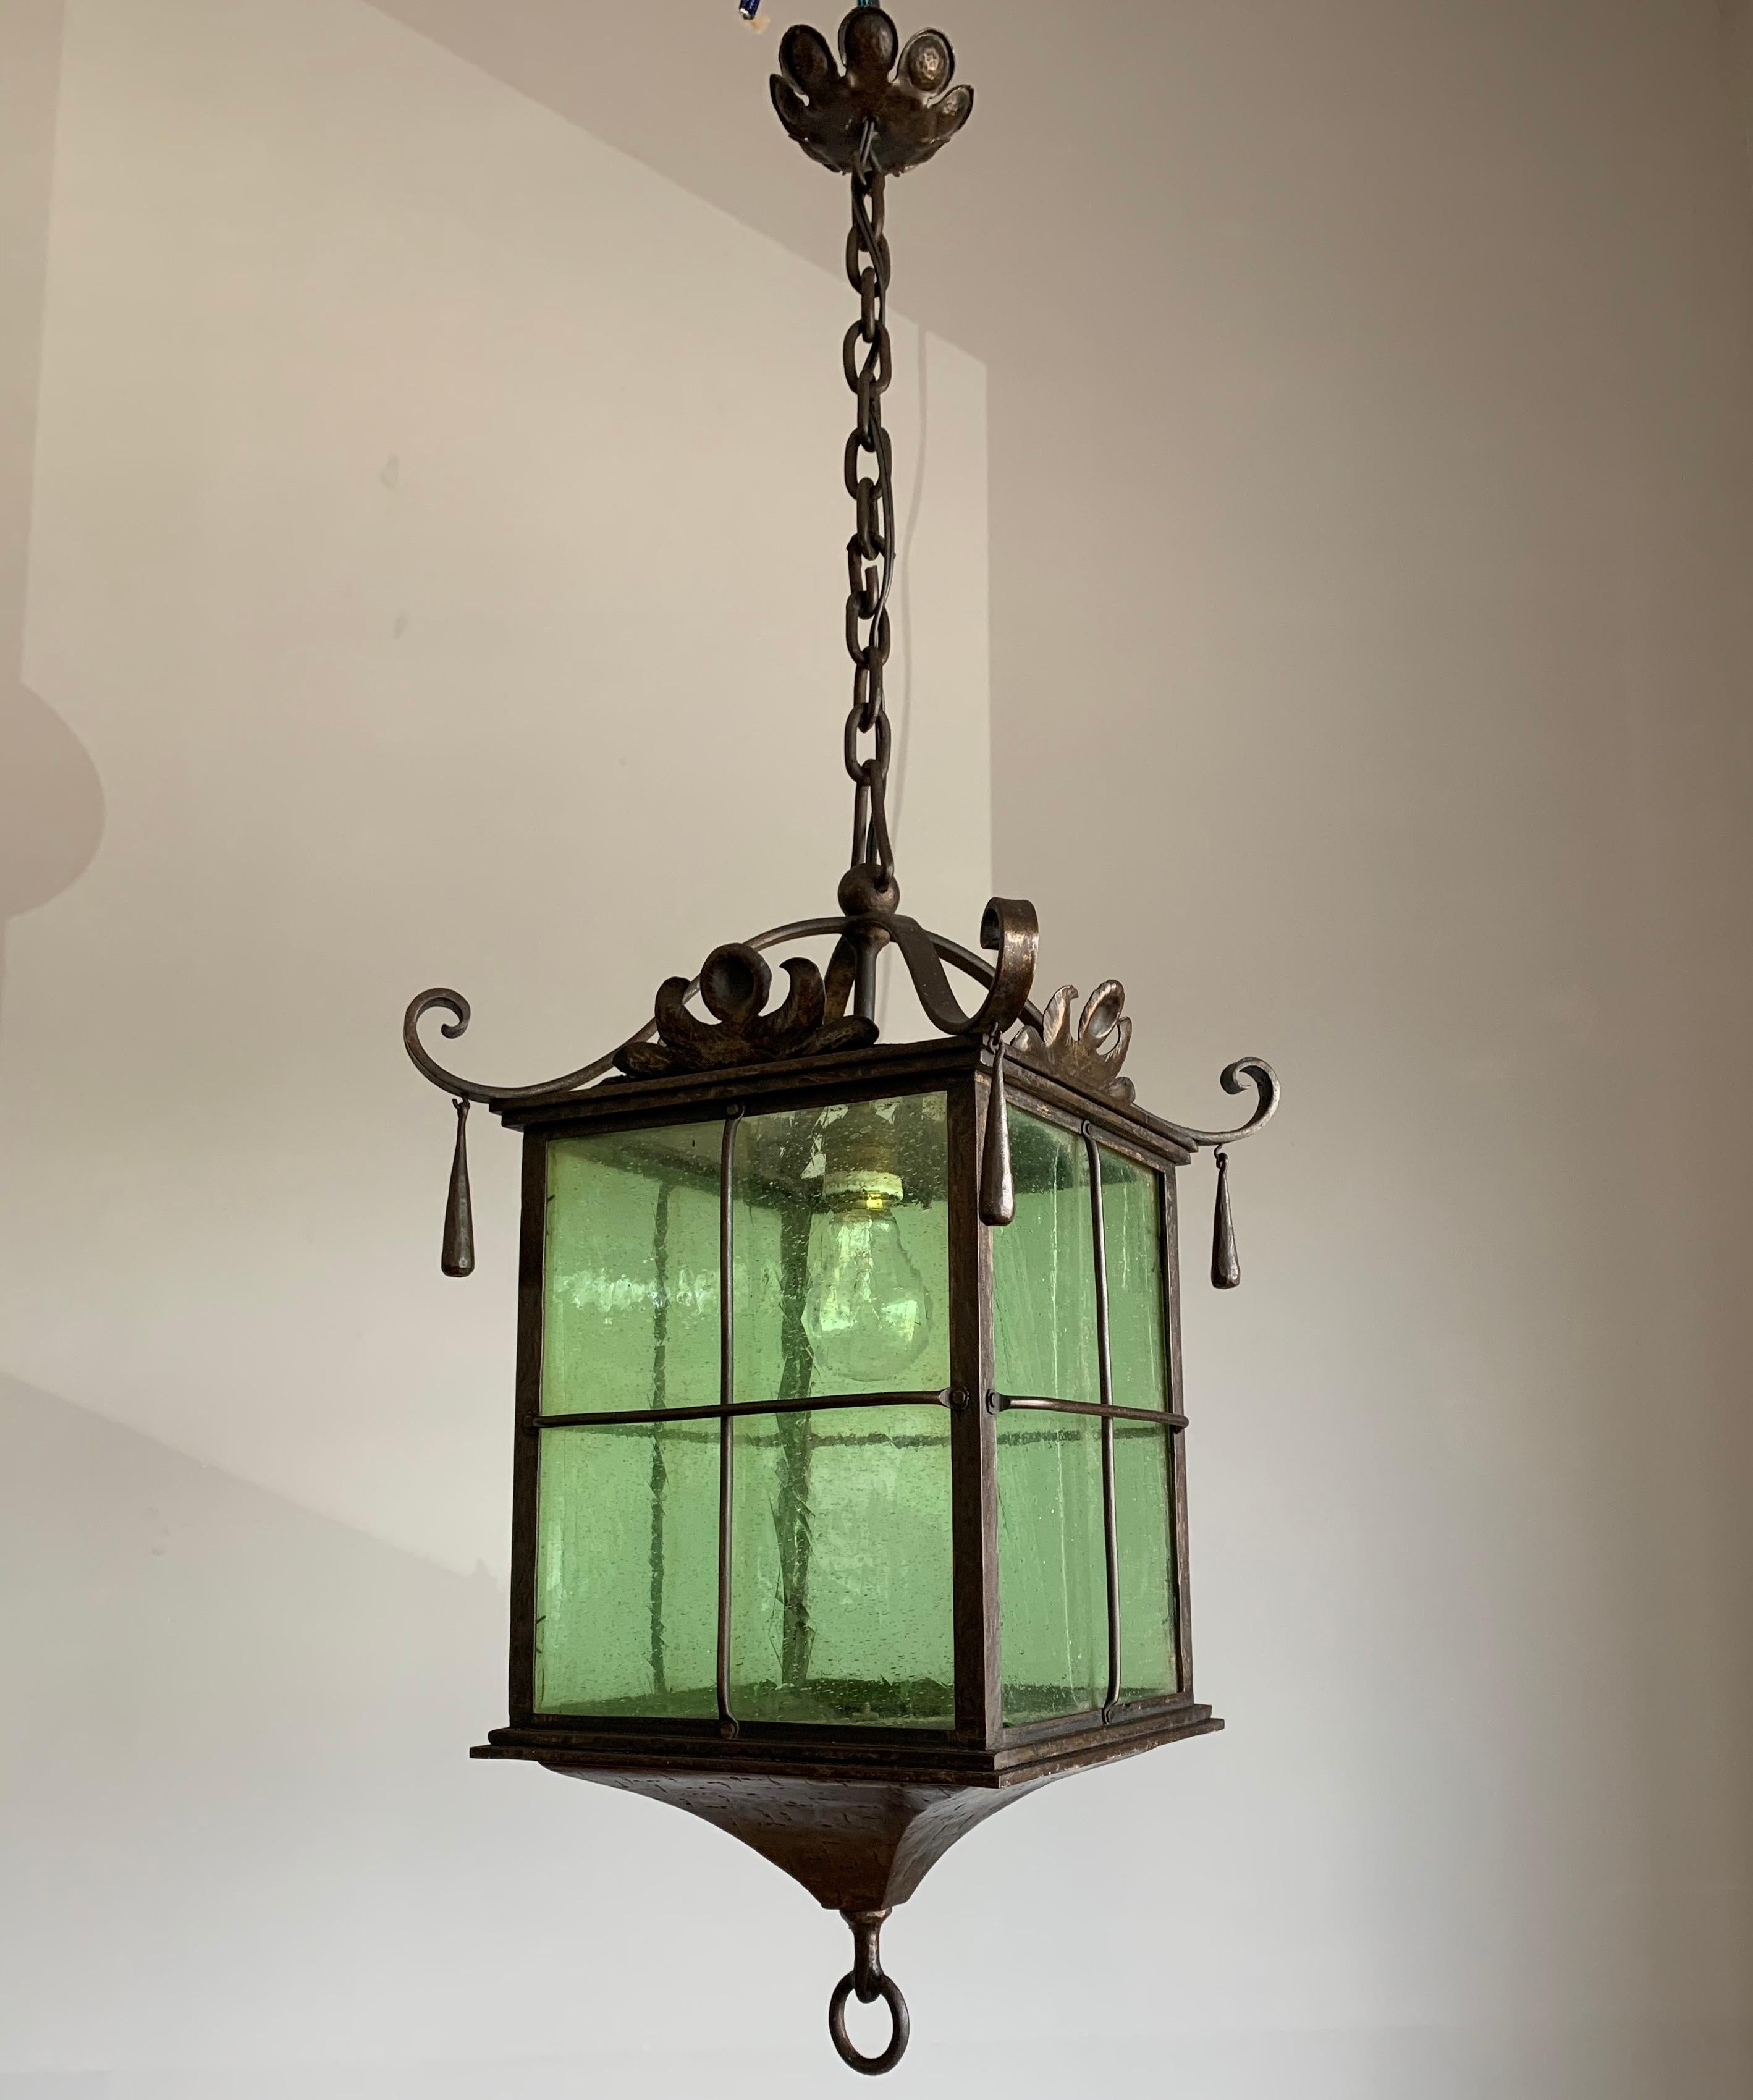 Impressive and fine quality craftsmanship light fixture. 

If you are a collector of truly original and all-handcrafted art and antiques then this large and one of a kind pendant could be flying your way soon. With antique light fixtures as one of